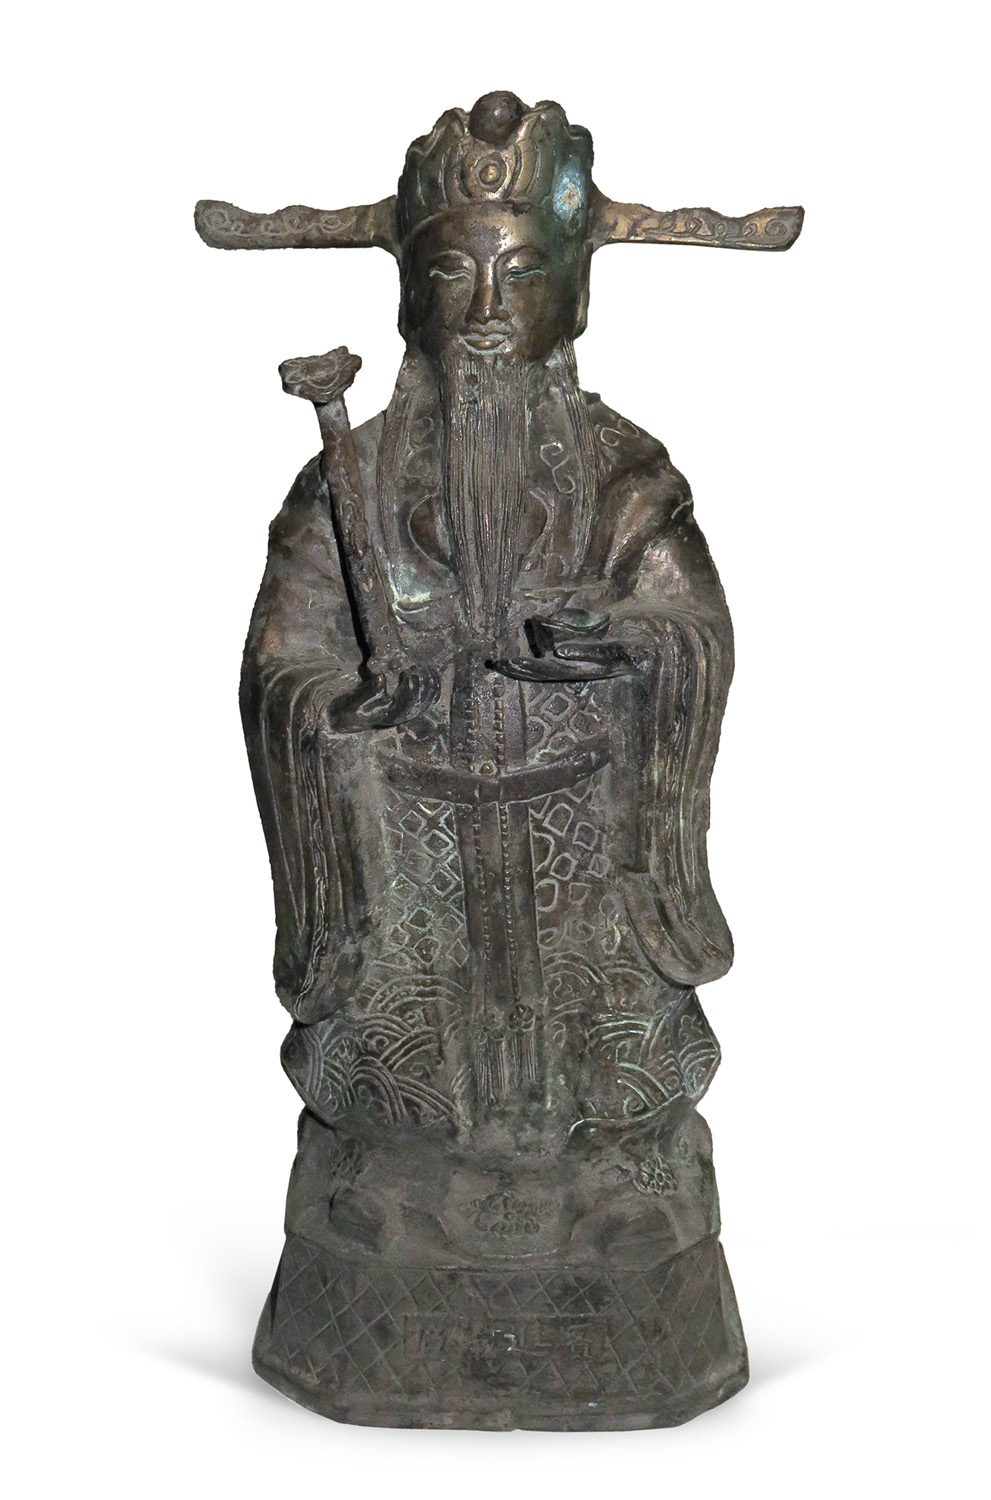 A CHINESE BRONZE SCULPTURE DEPICTING LUXING. END 19TH EARLY 20TH CENTURY.